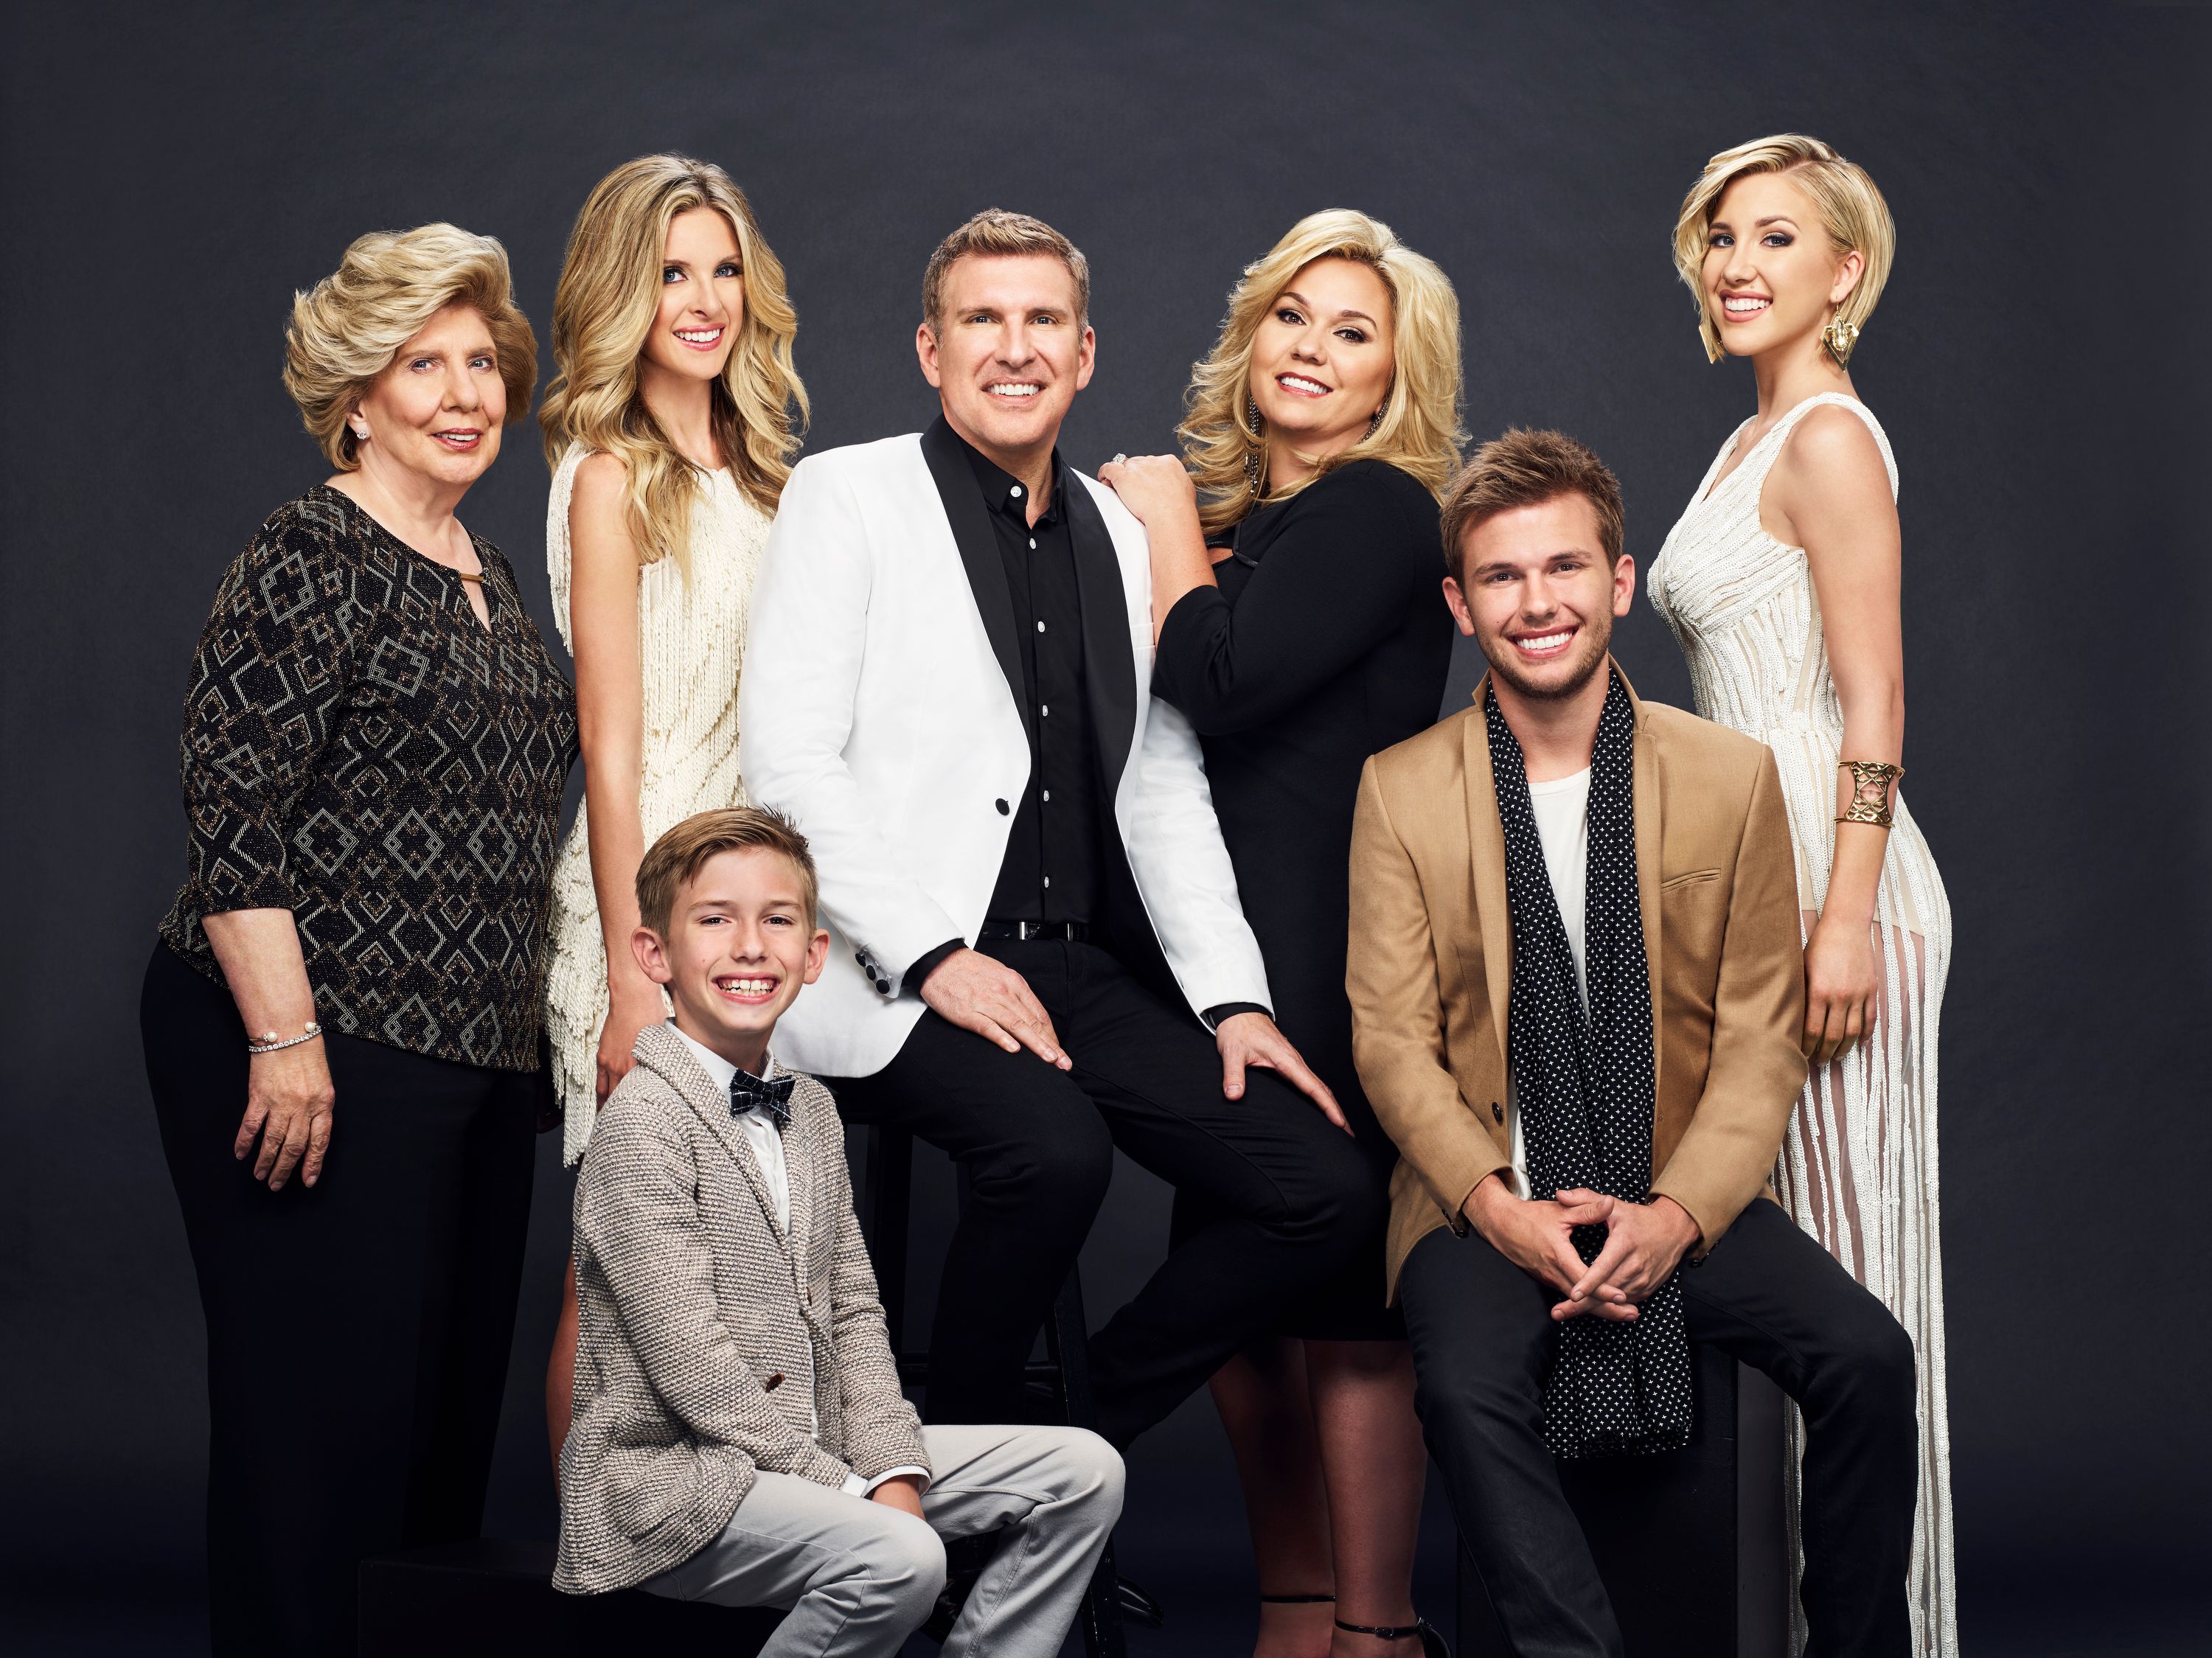 Faye Chrisley, Lindsie Chrisley Campbell, Grayson, Todd, Julie, Chase, and Savannah Chrisley on March 17, 2016 | Source: Getty Images